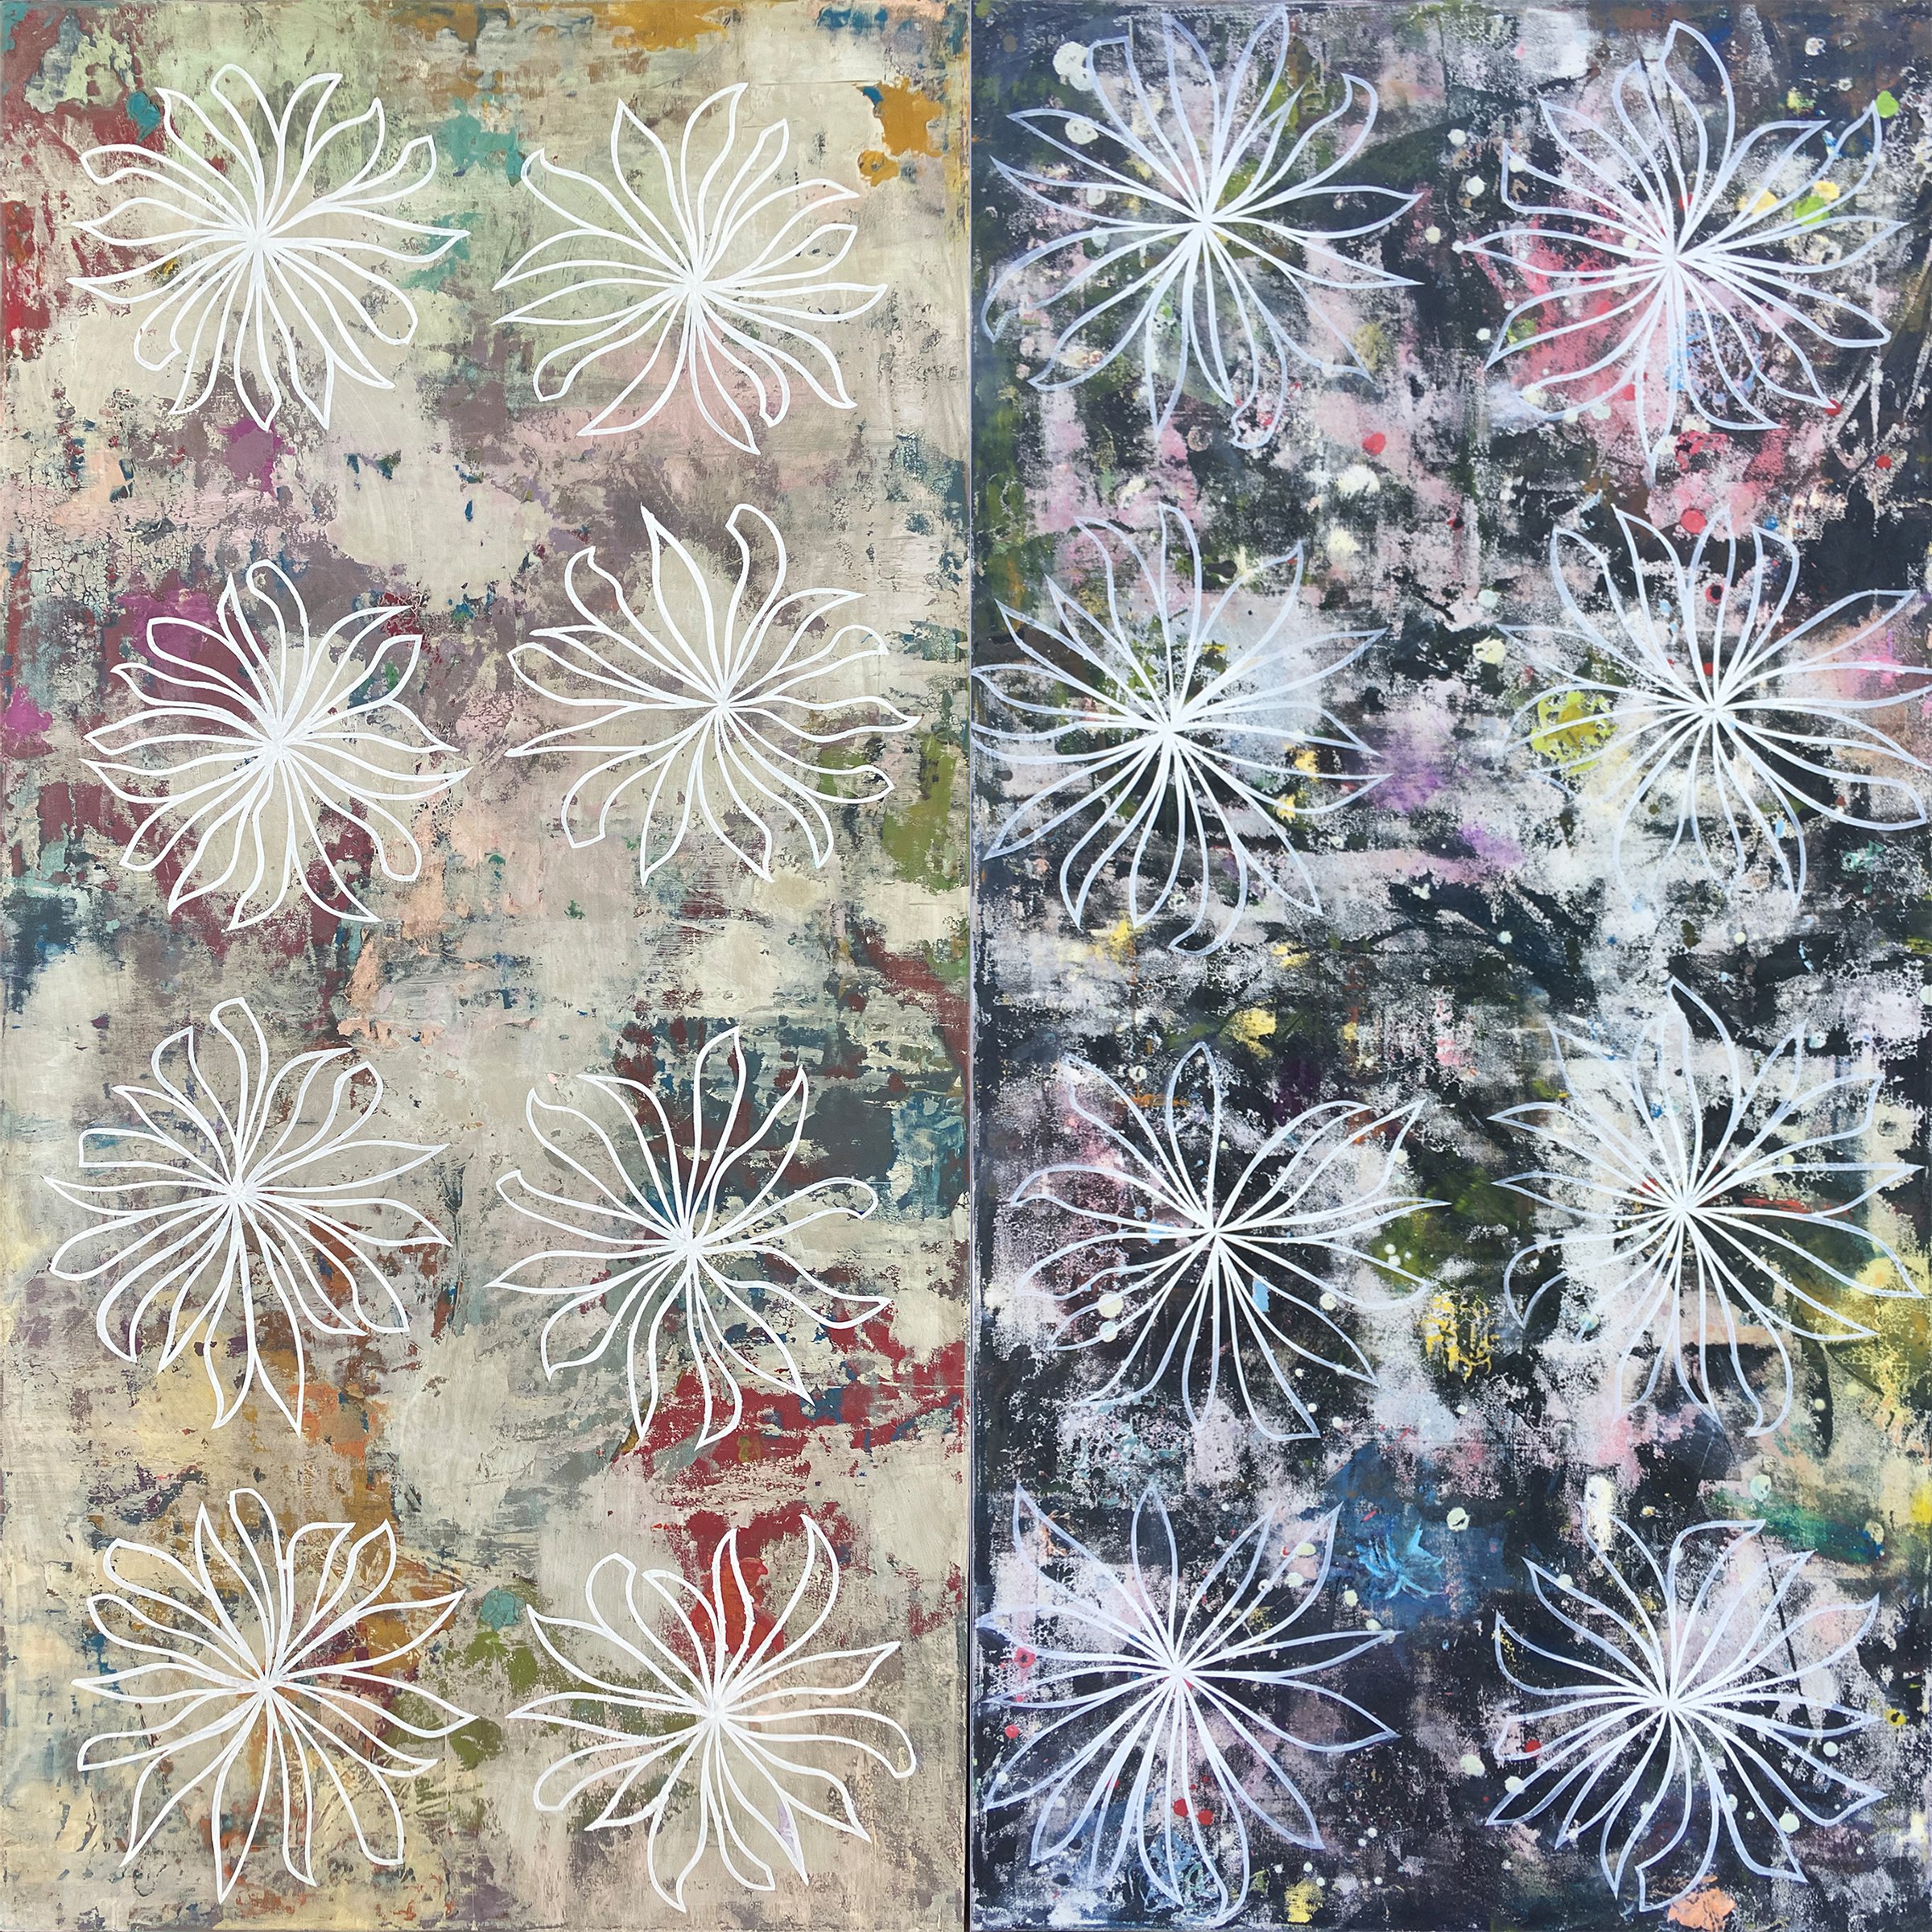 Perry Burns, Flower Galaxy Diptych, Oil on canvas, 72 x 72 inches $10,500, Flower Galaxy 1 and 2, 36 x 72 each, $6500 each